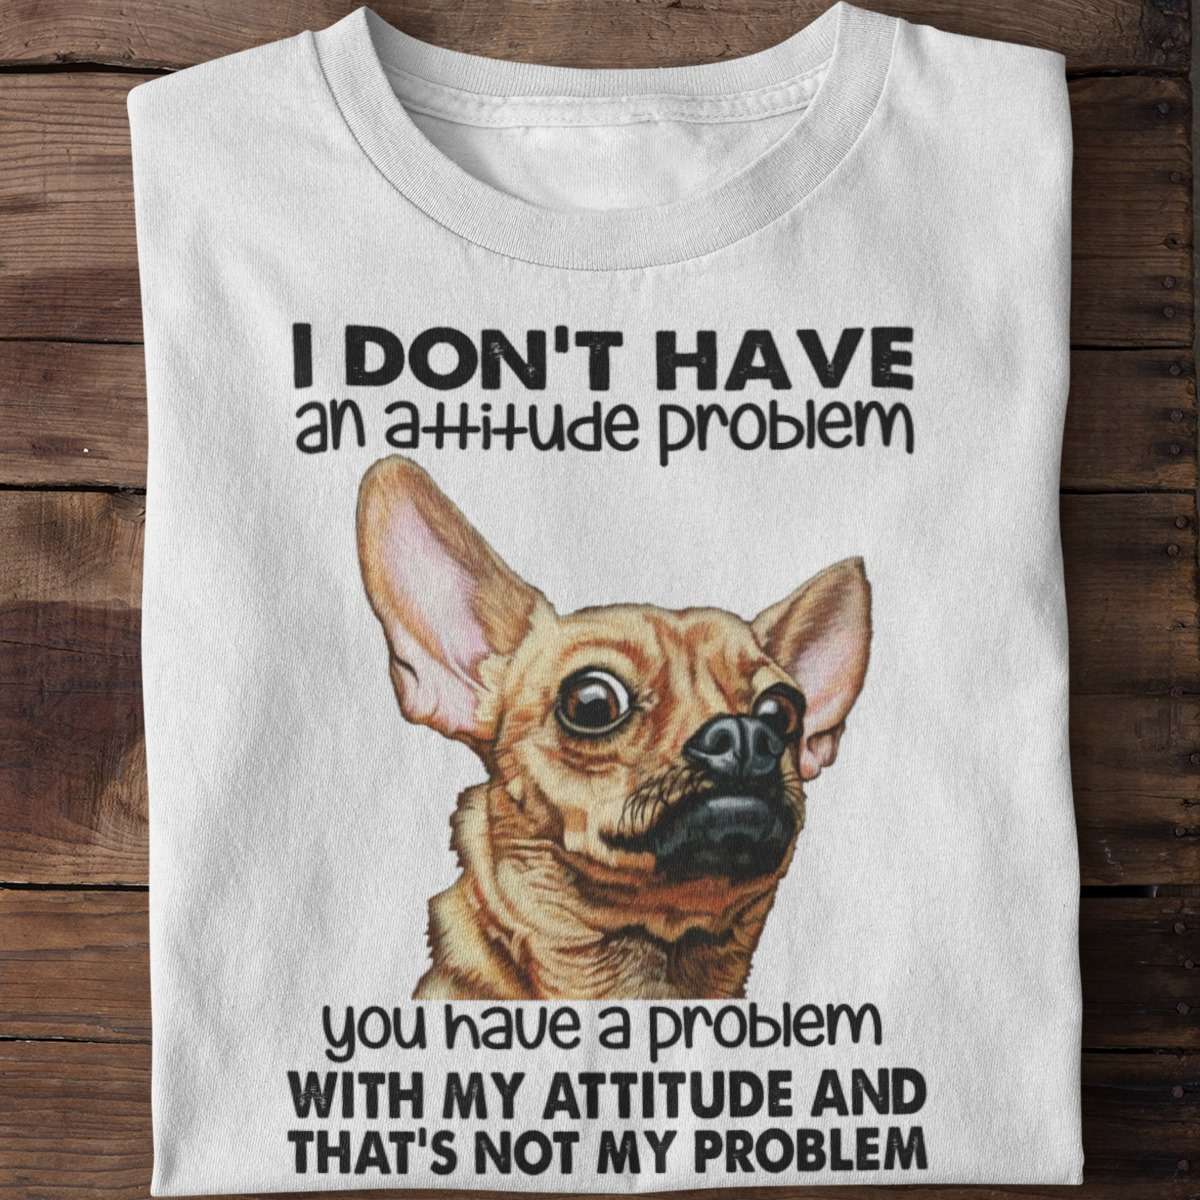 I don't have an attitude problem, you may have a problem with my attitude and that's not my problem - Chihuahua dog